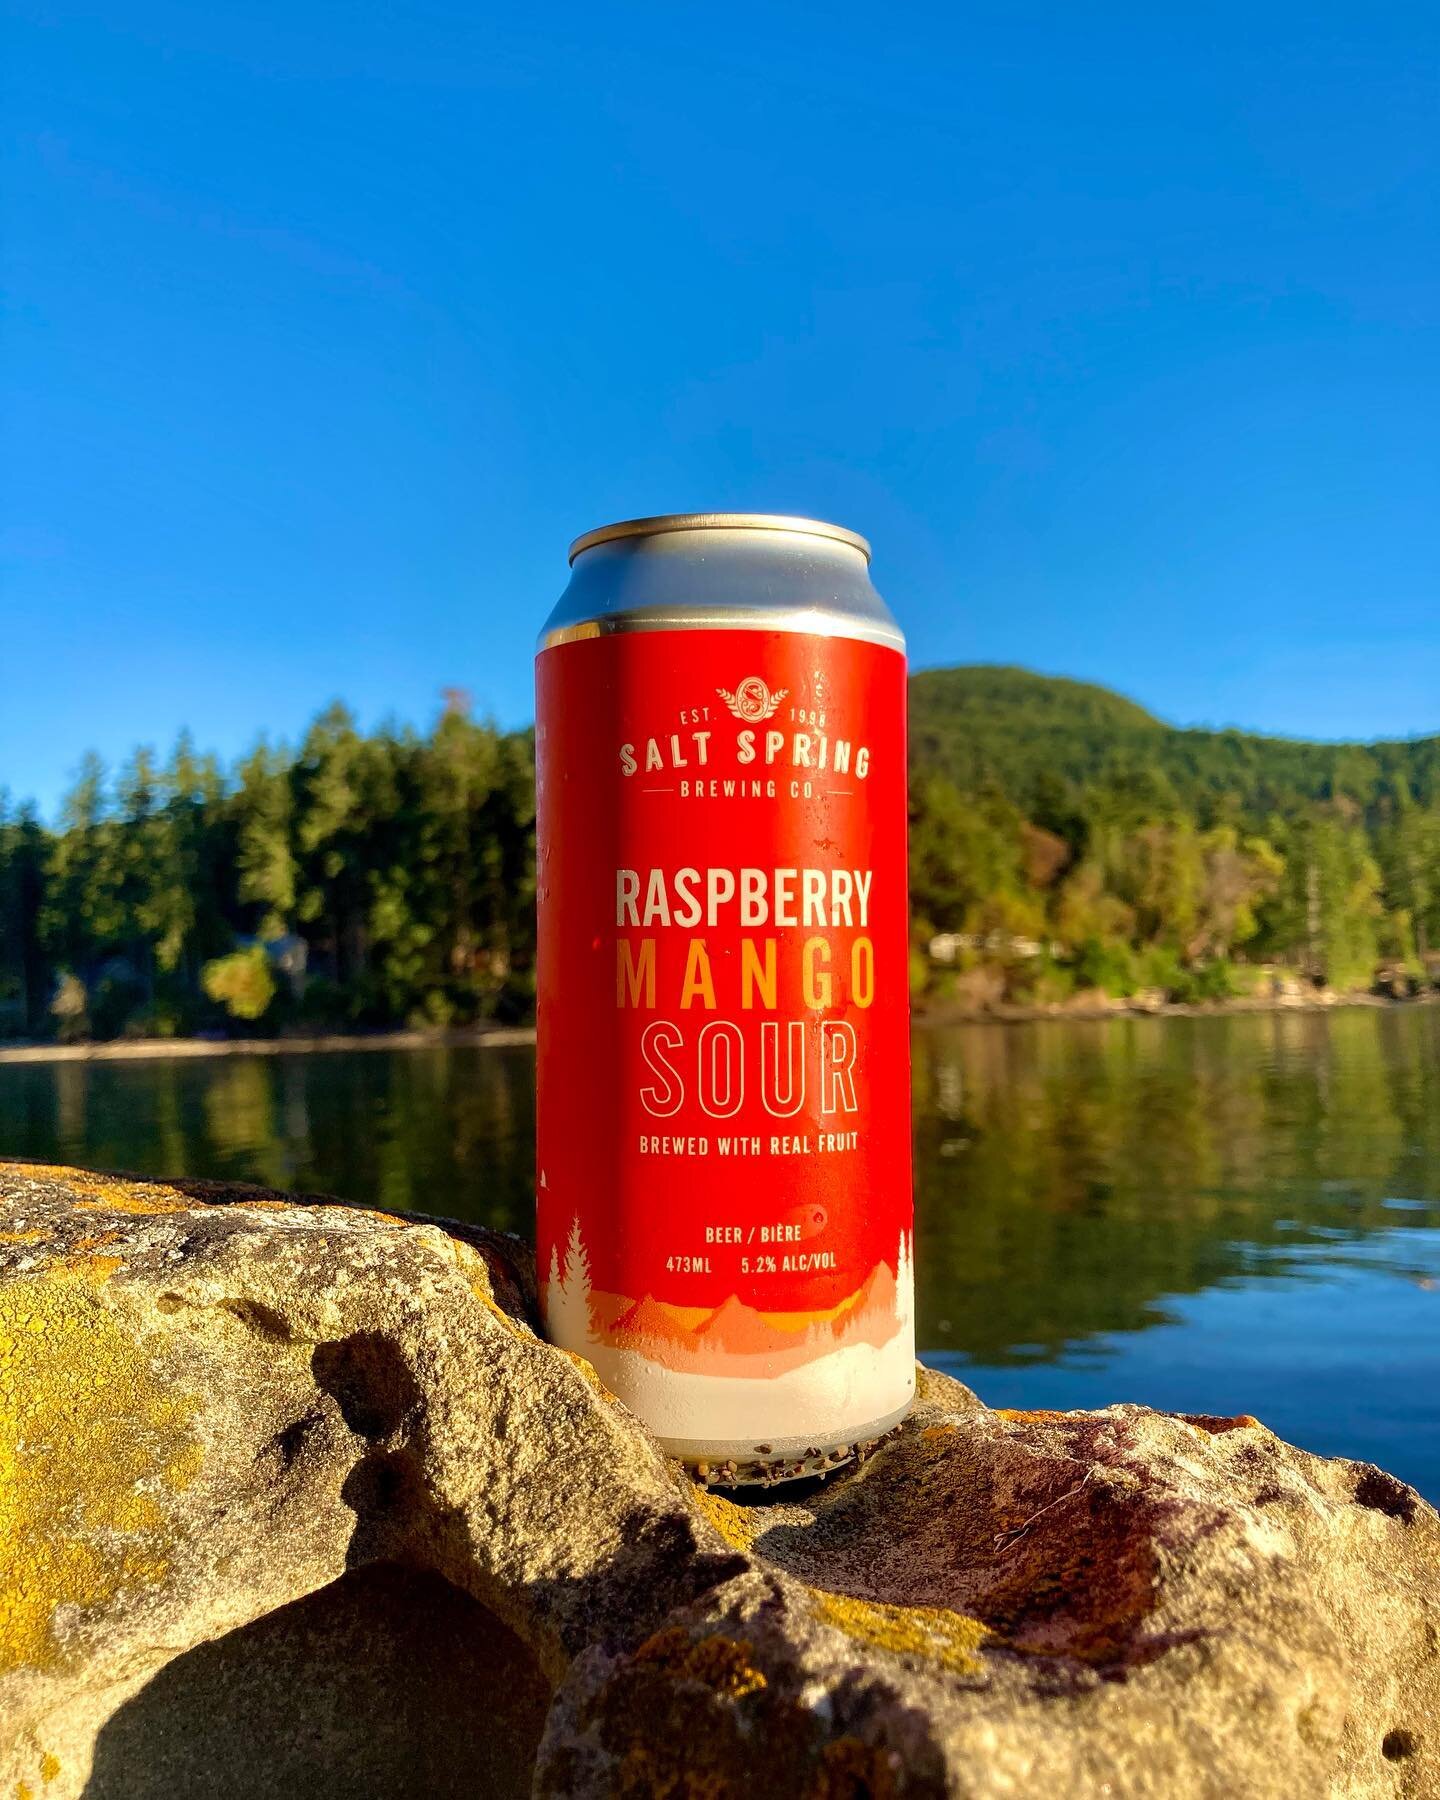 The Sour at sunset! 

Where&rsquo;s your favourite place on Salt Spring to #drinkbeerwithnature ?? Taken on the beautiful Baker Beach just as the sun was beginning to set. 

The Raspberry Mango Sour is quickly becoming one of our most popular beers a